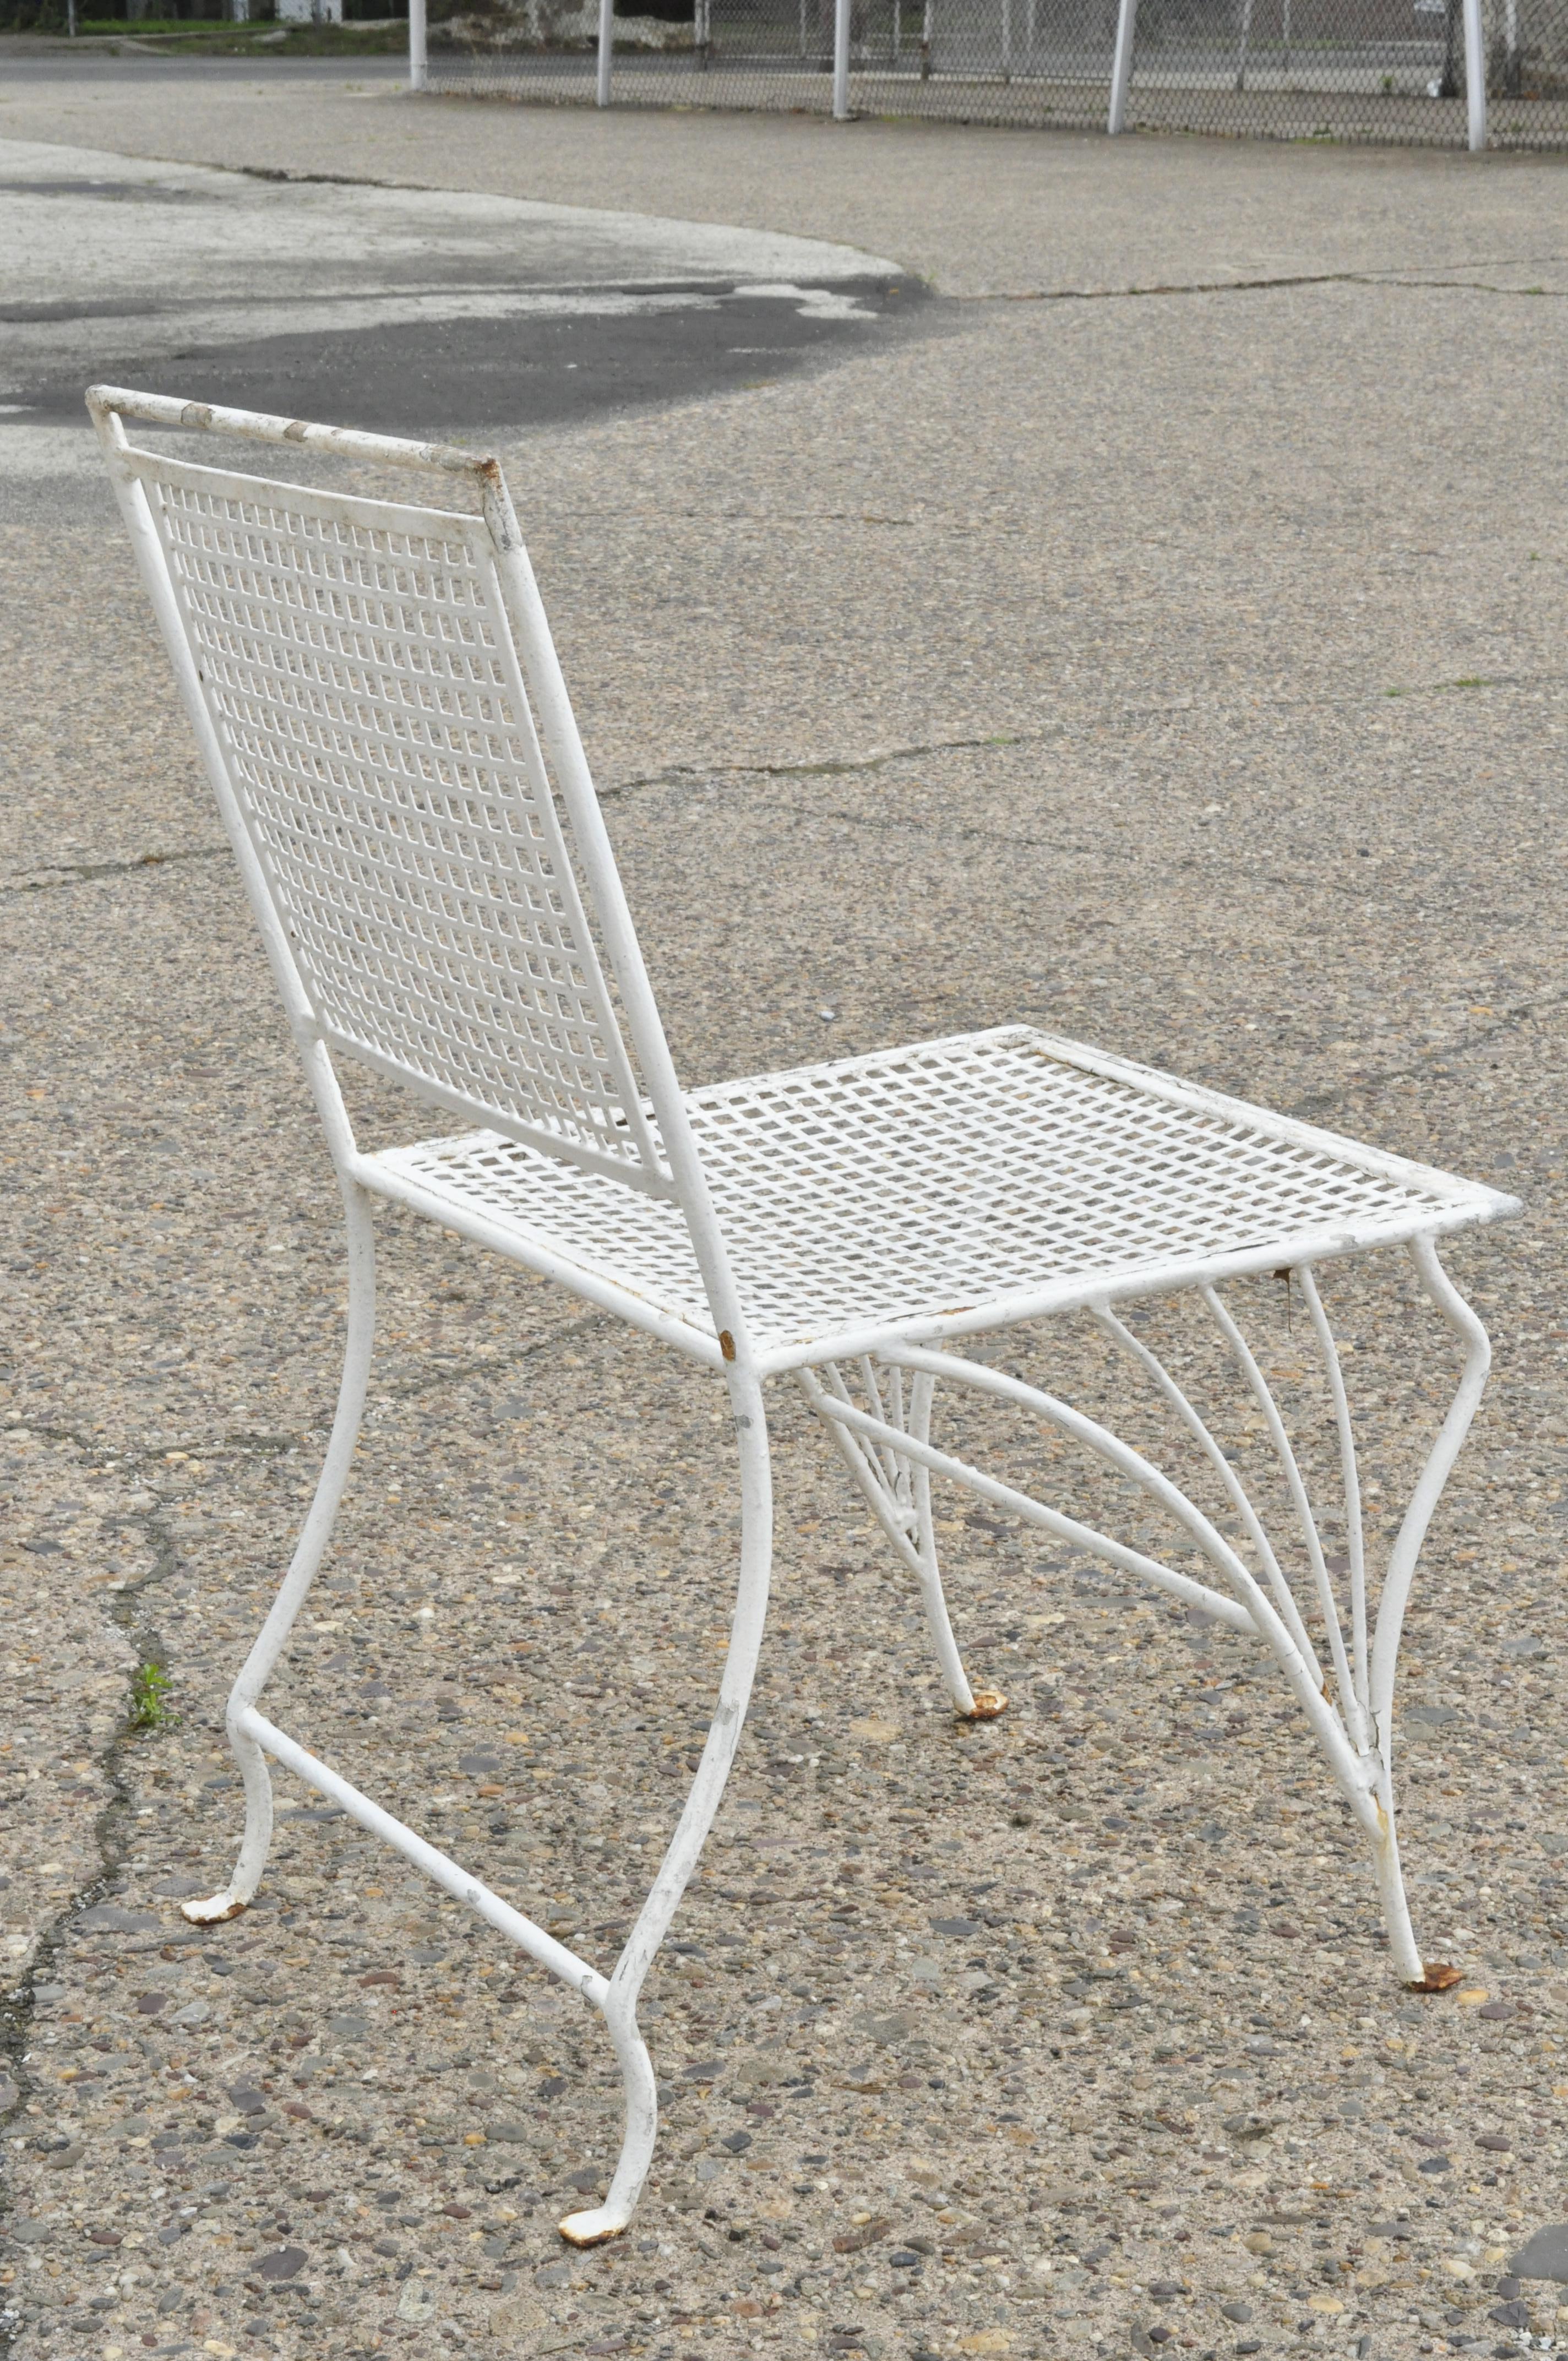 Set of 4 Wrought Iron Art Nouveau French Style Garden Patio Dining Chairs 1